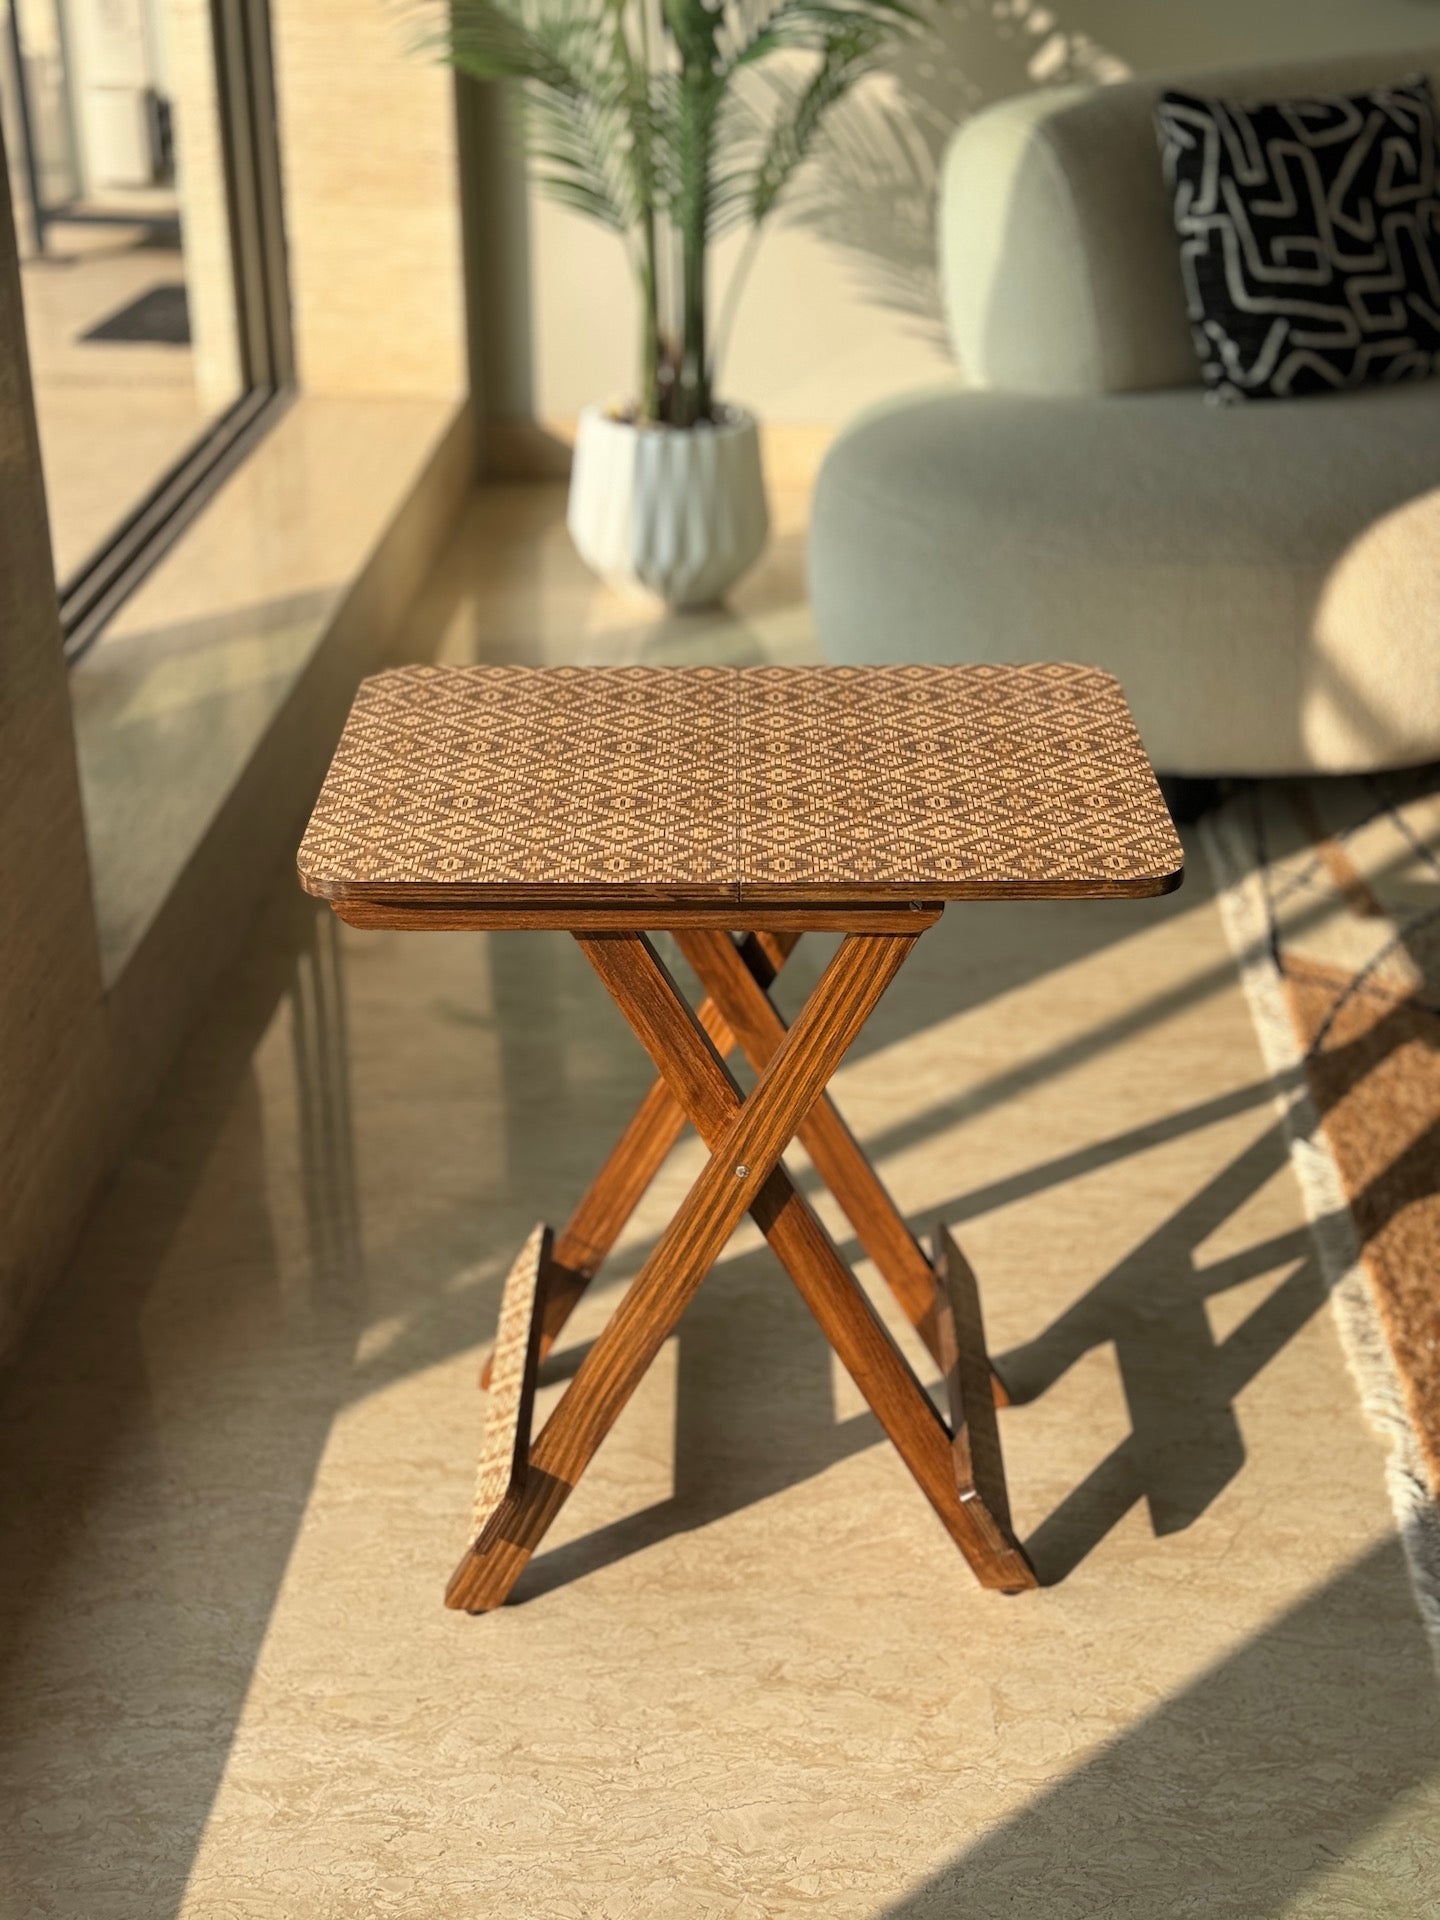 FOLDING TABLES FOR TIGHT SPACES – Mason Home by Amarsons